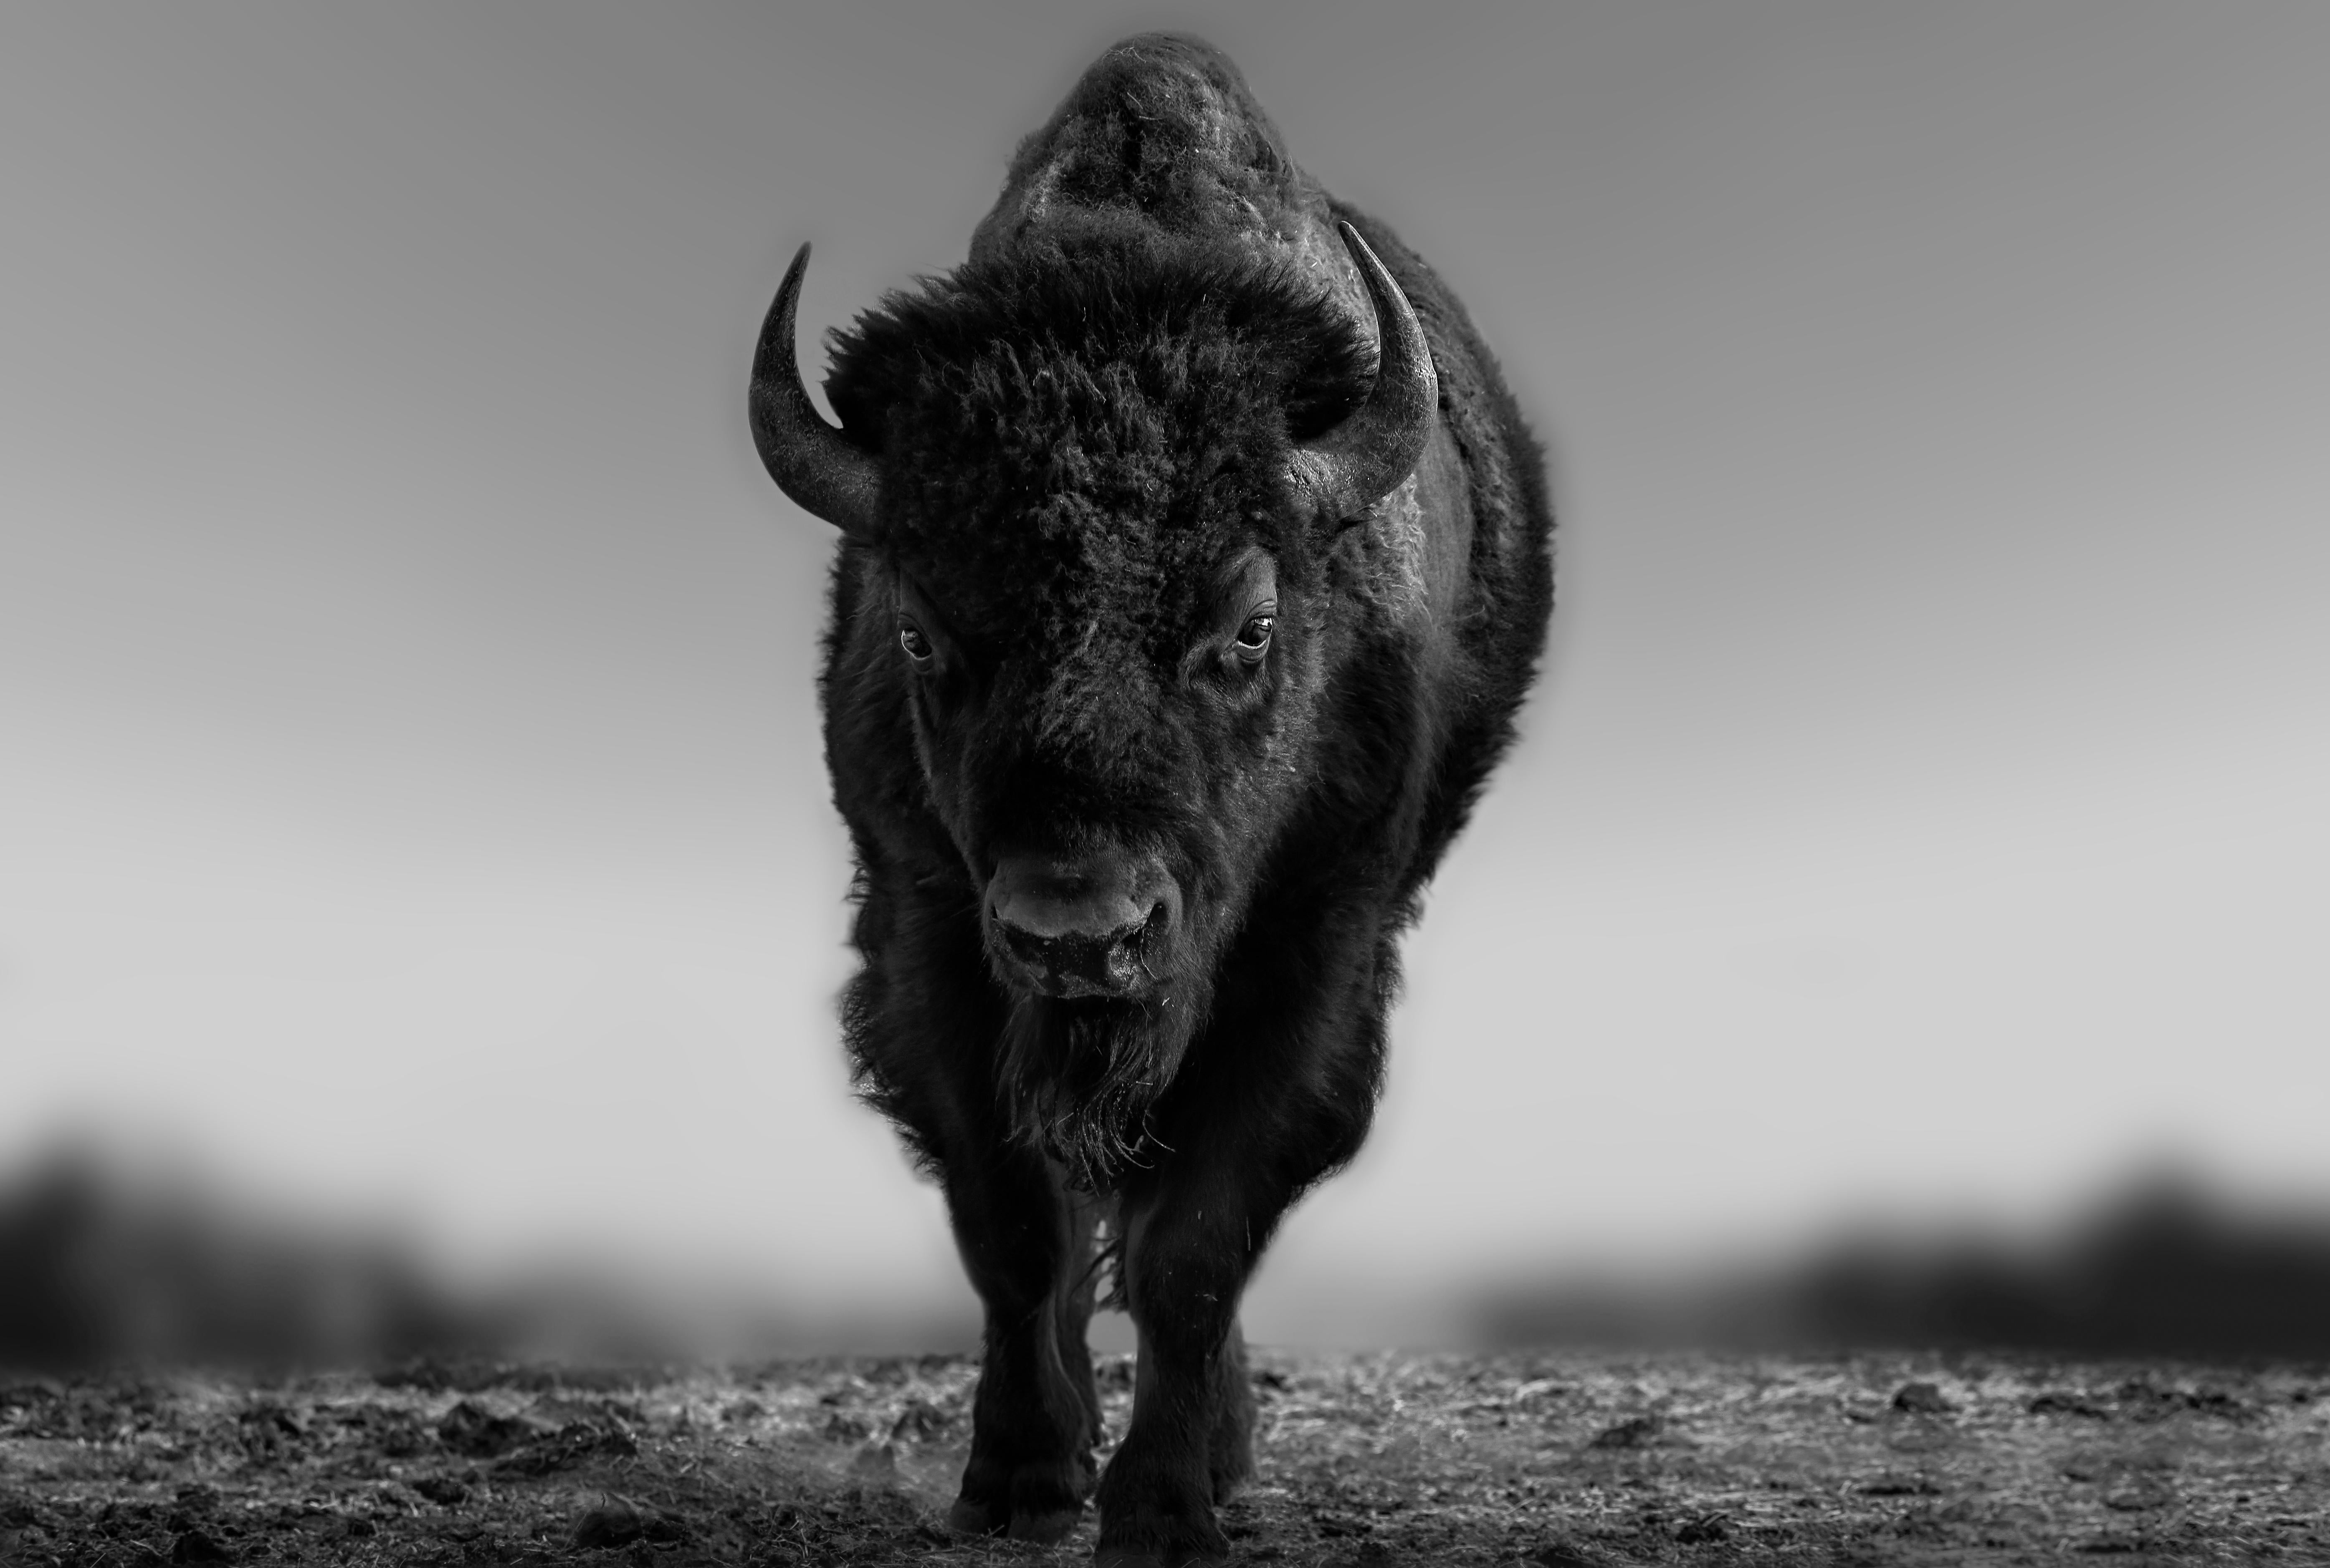 Shane Russeck Black and White Photograph - "The Beast" 36x48 -Black & White Photograph of Bison Buffalo Unsigned Test Print